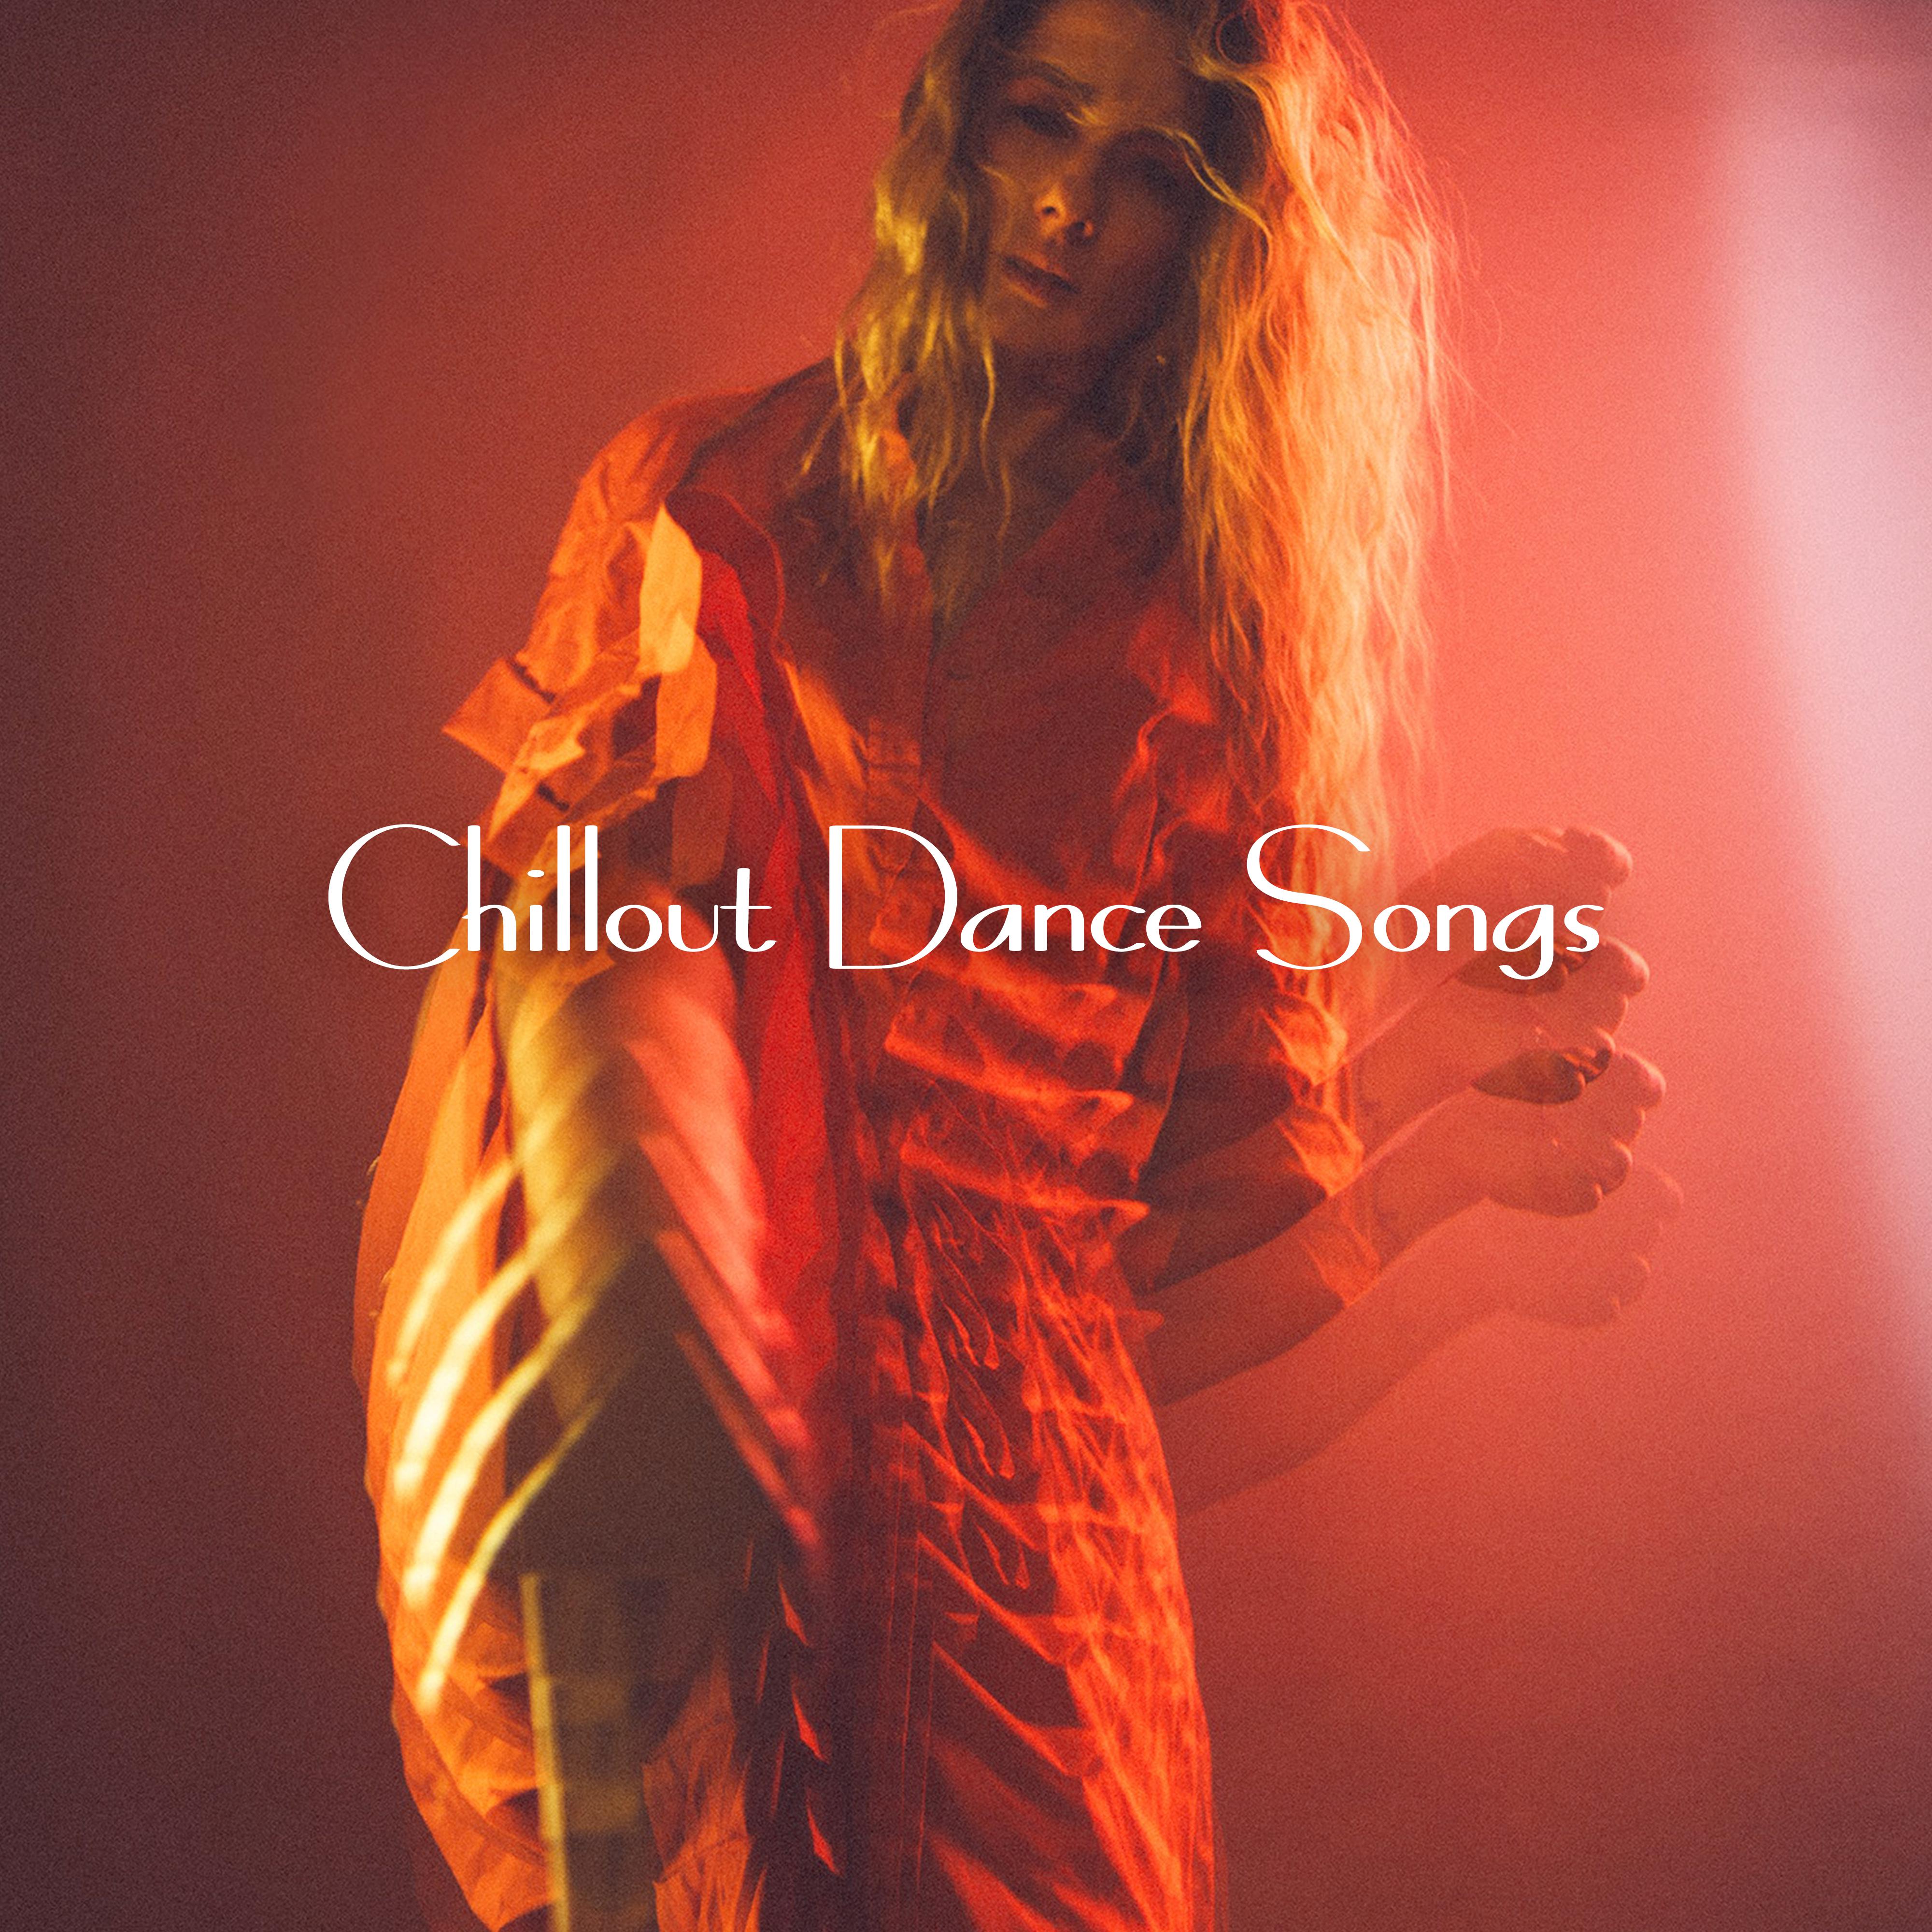 Chillout Dance Songs: 15 Dance Tracks Perfect for Dancing and Partying